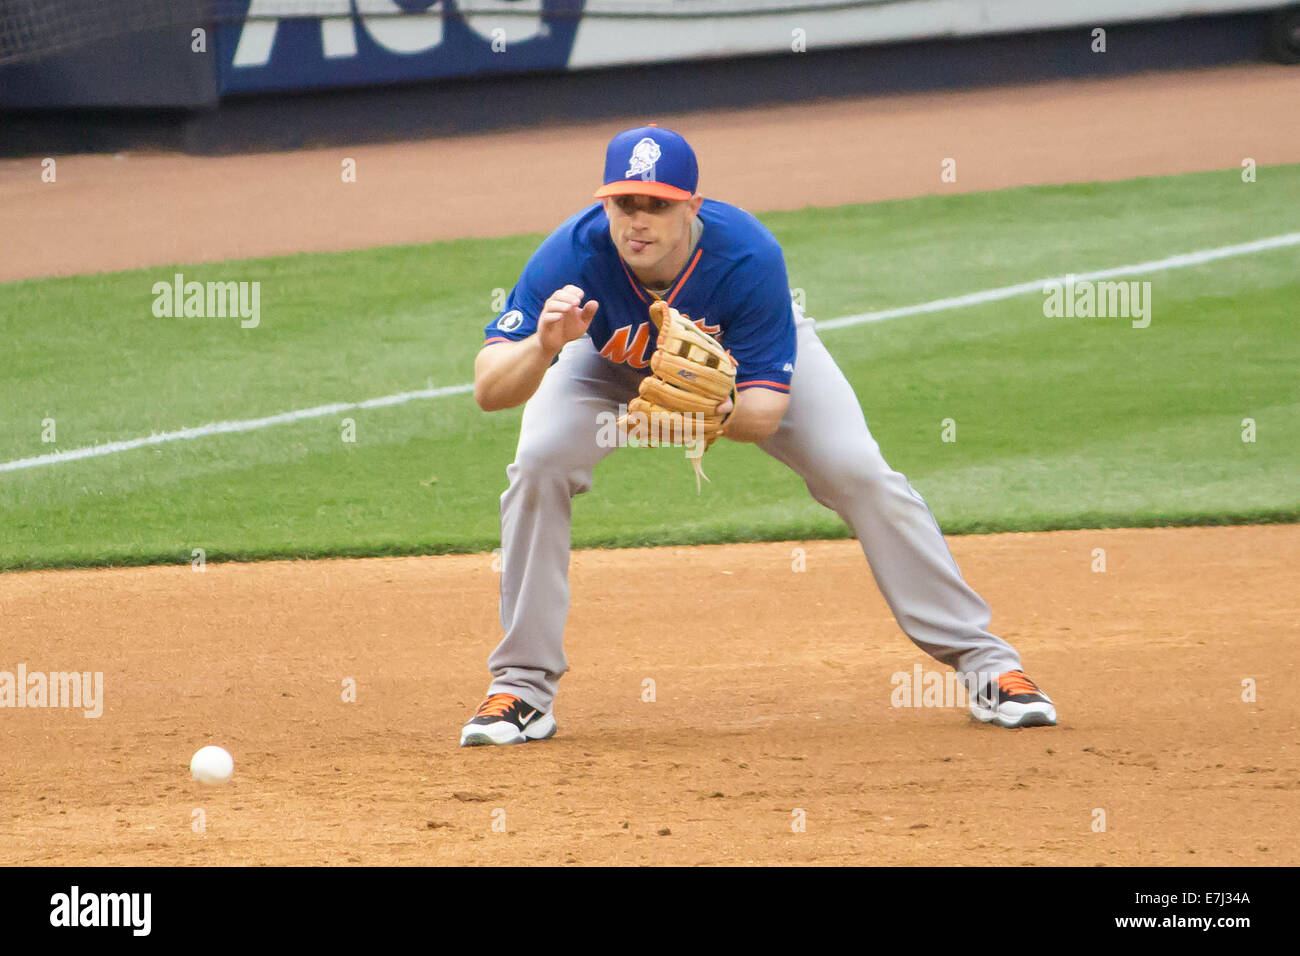 This image shows NY Mets third baseman and superstar David Wright fielding  a ball against the NY Yankees at Yankee Stadium Stock Photo